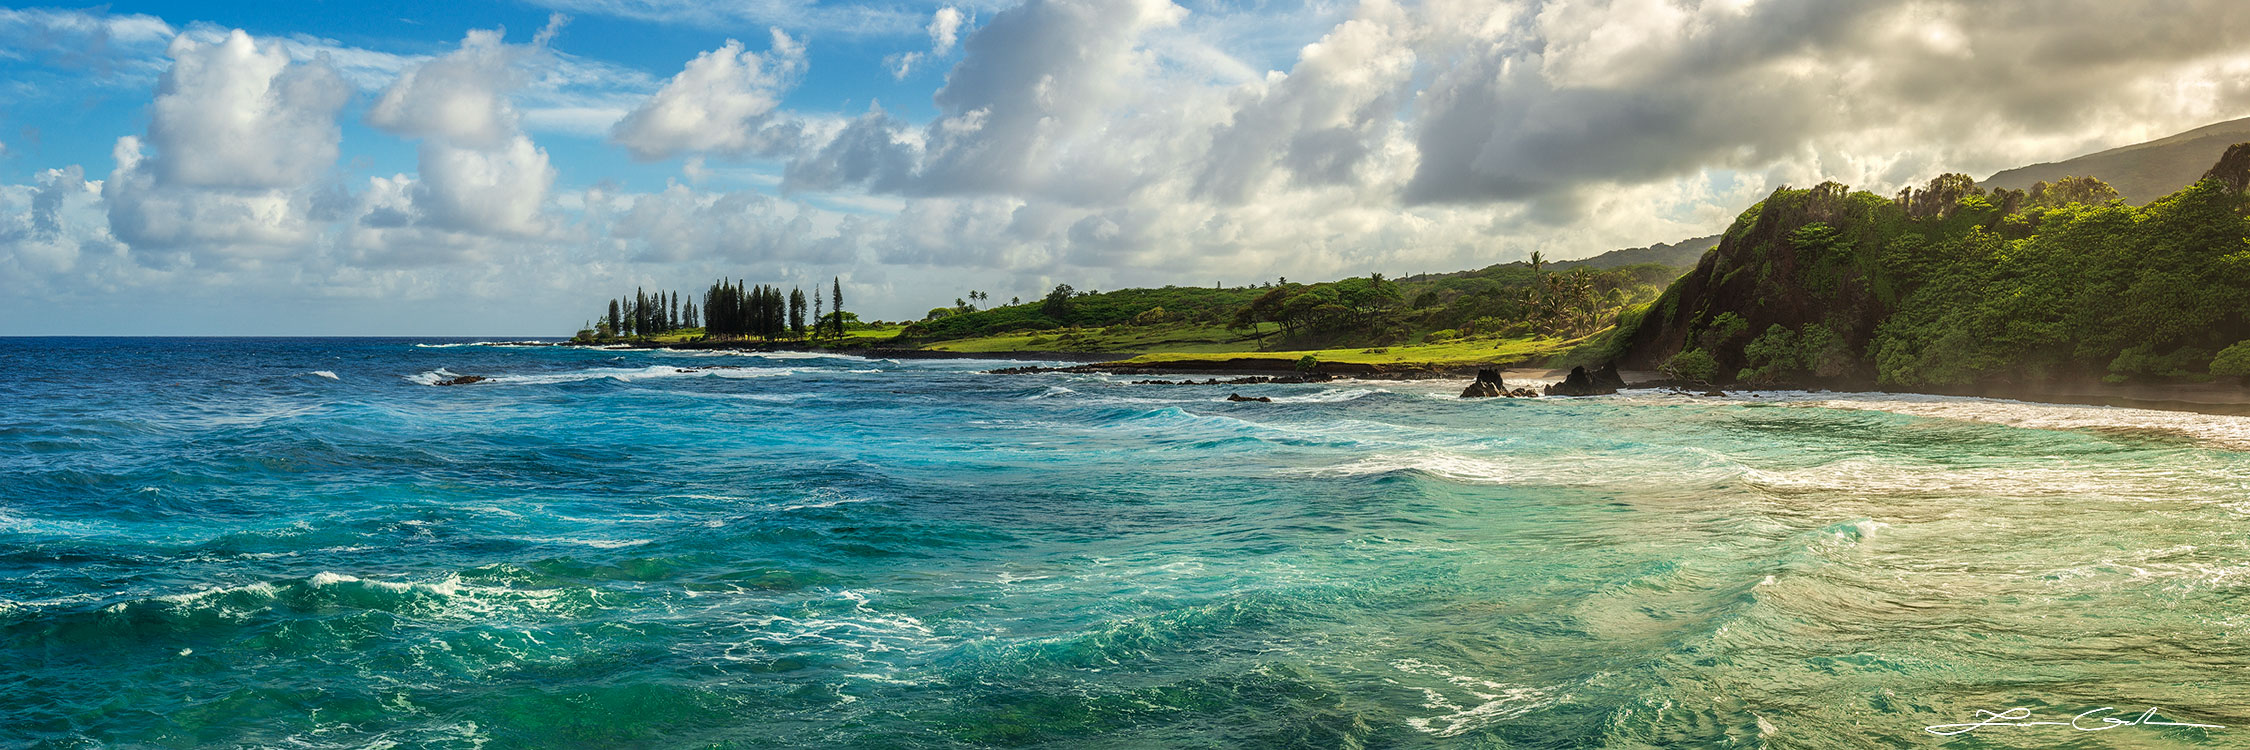 Panorama of an animated ocean bay in Hawaii with a distant isthmus under a setting sun, capturing a lively sea in deep blues and vibrant turquoise - Gintchin Fine Art